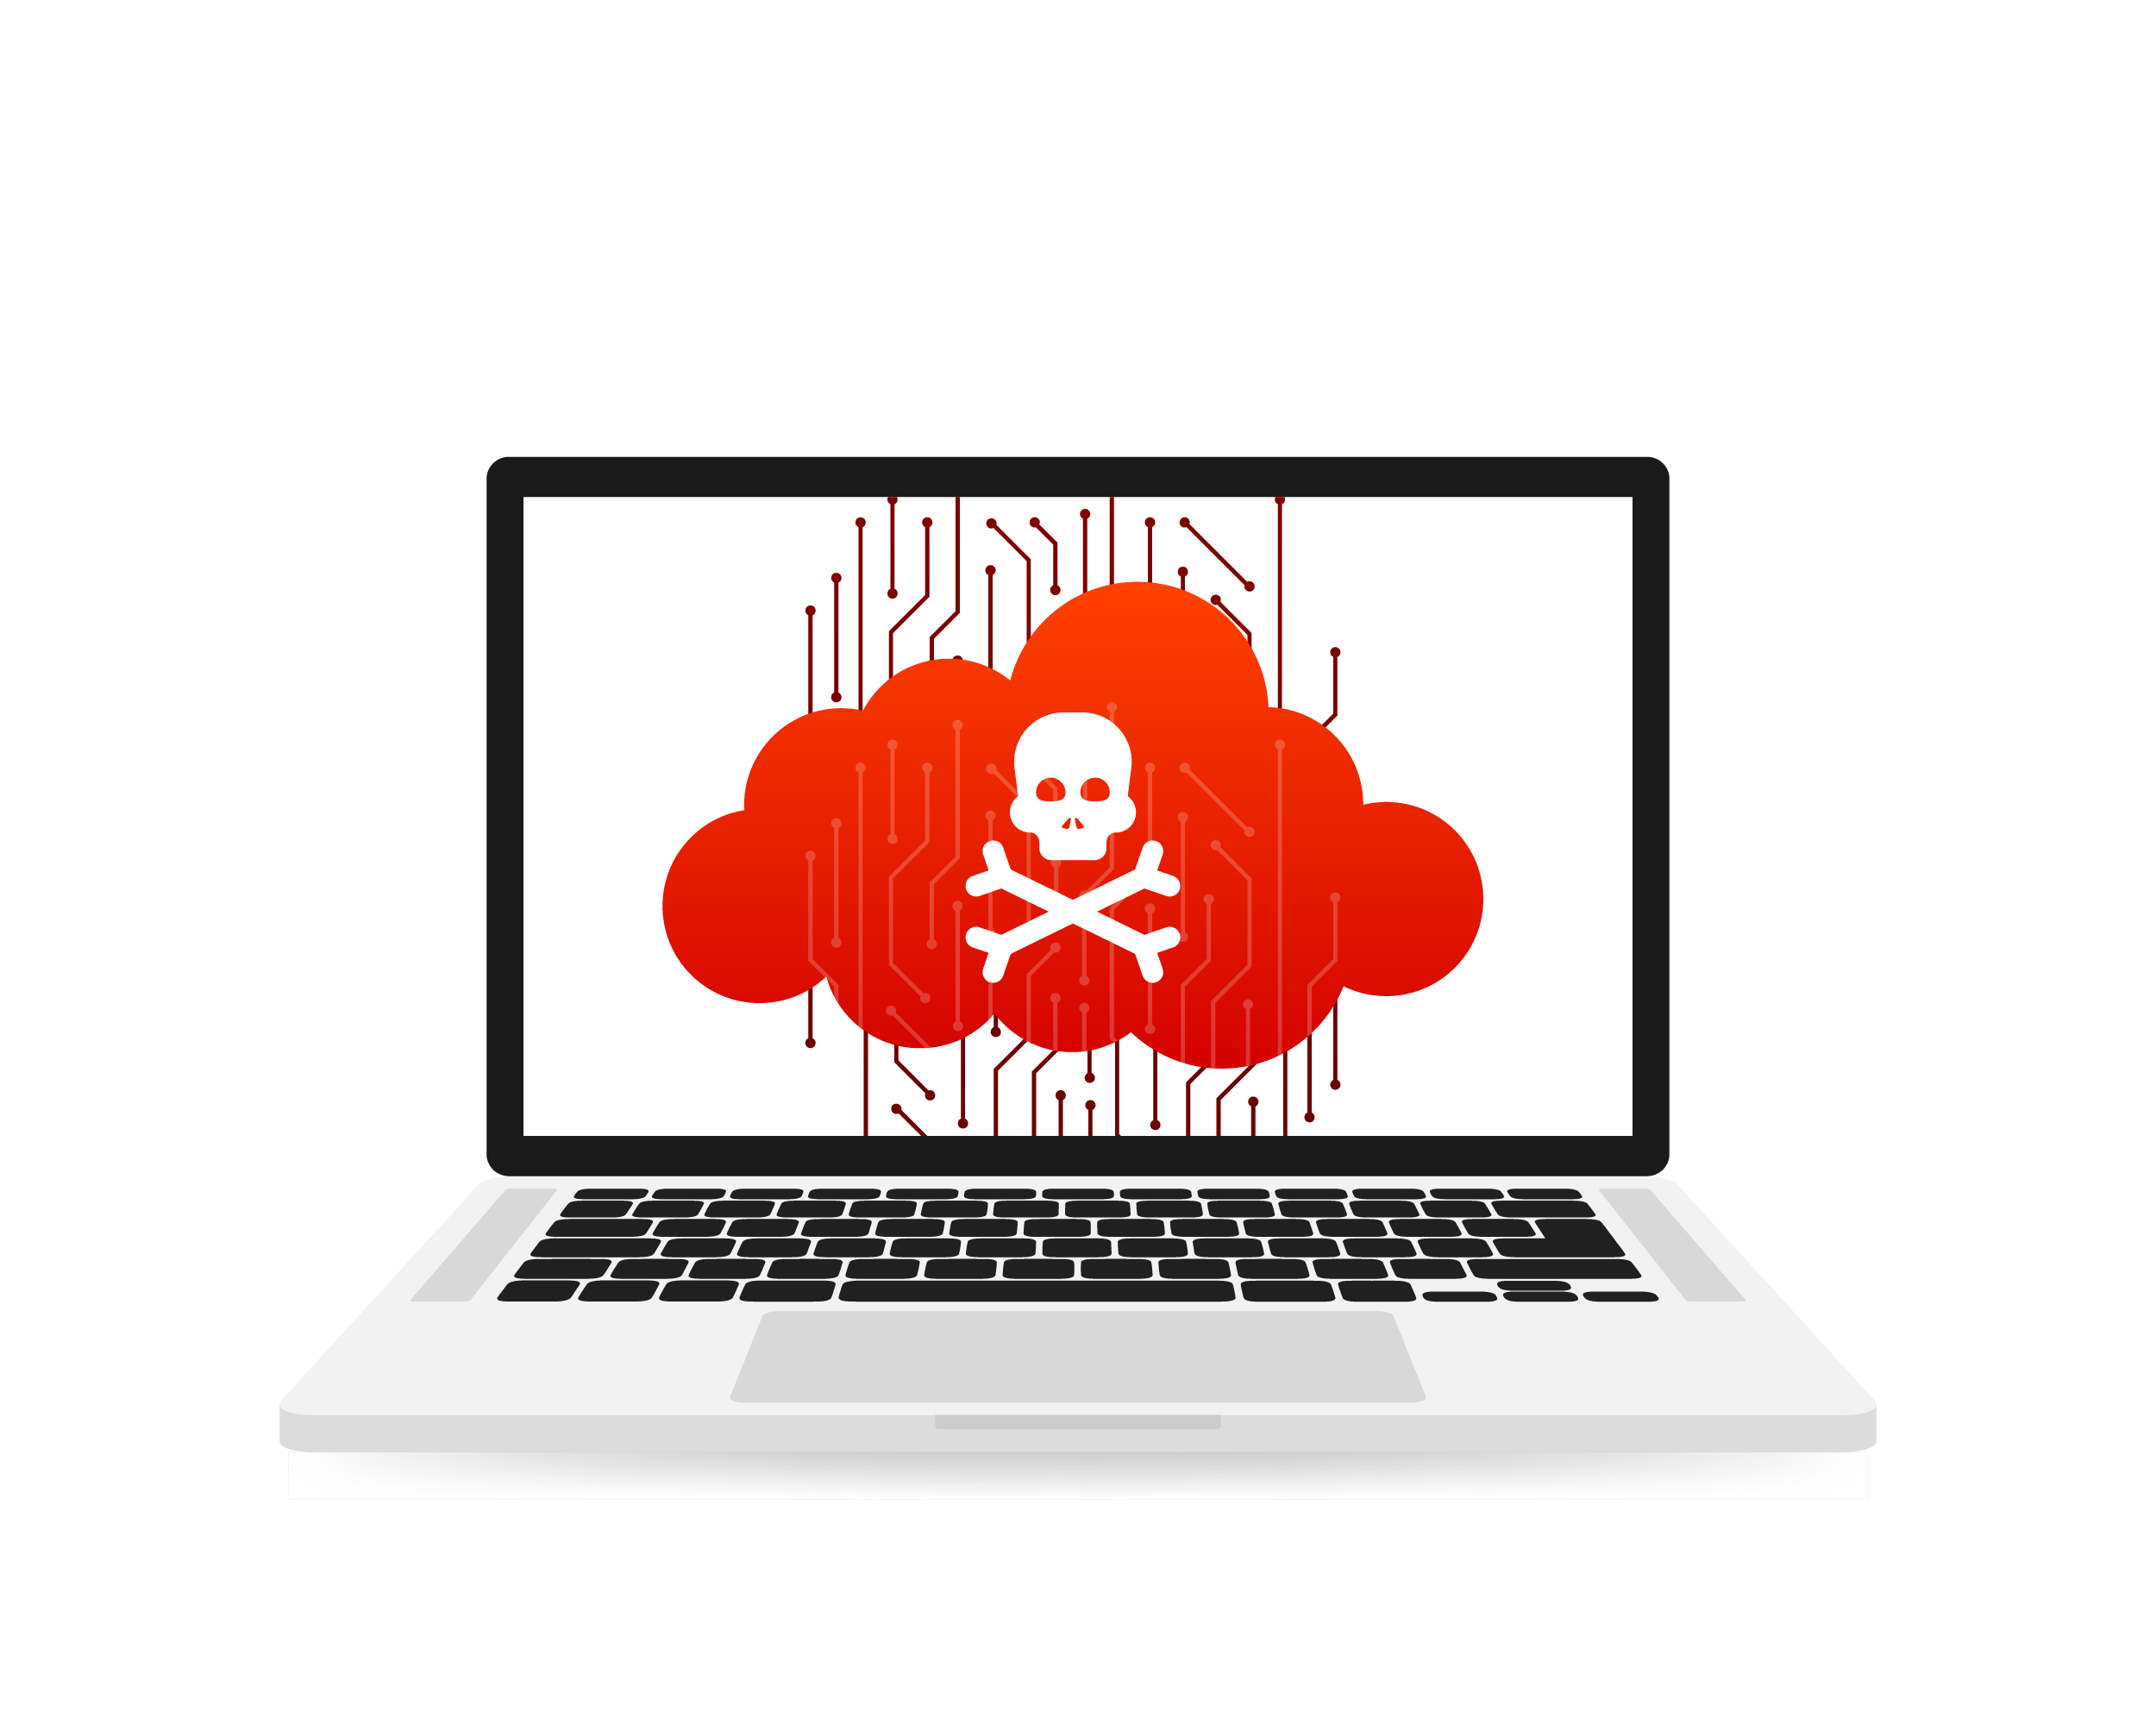 Laptop computer with red cloud and skull/crossbones